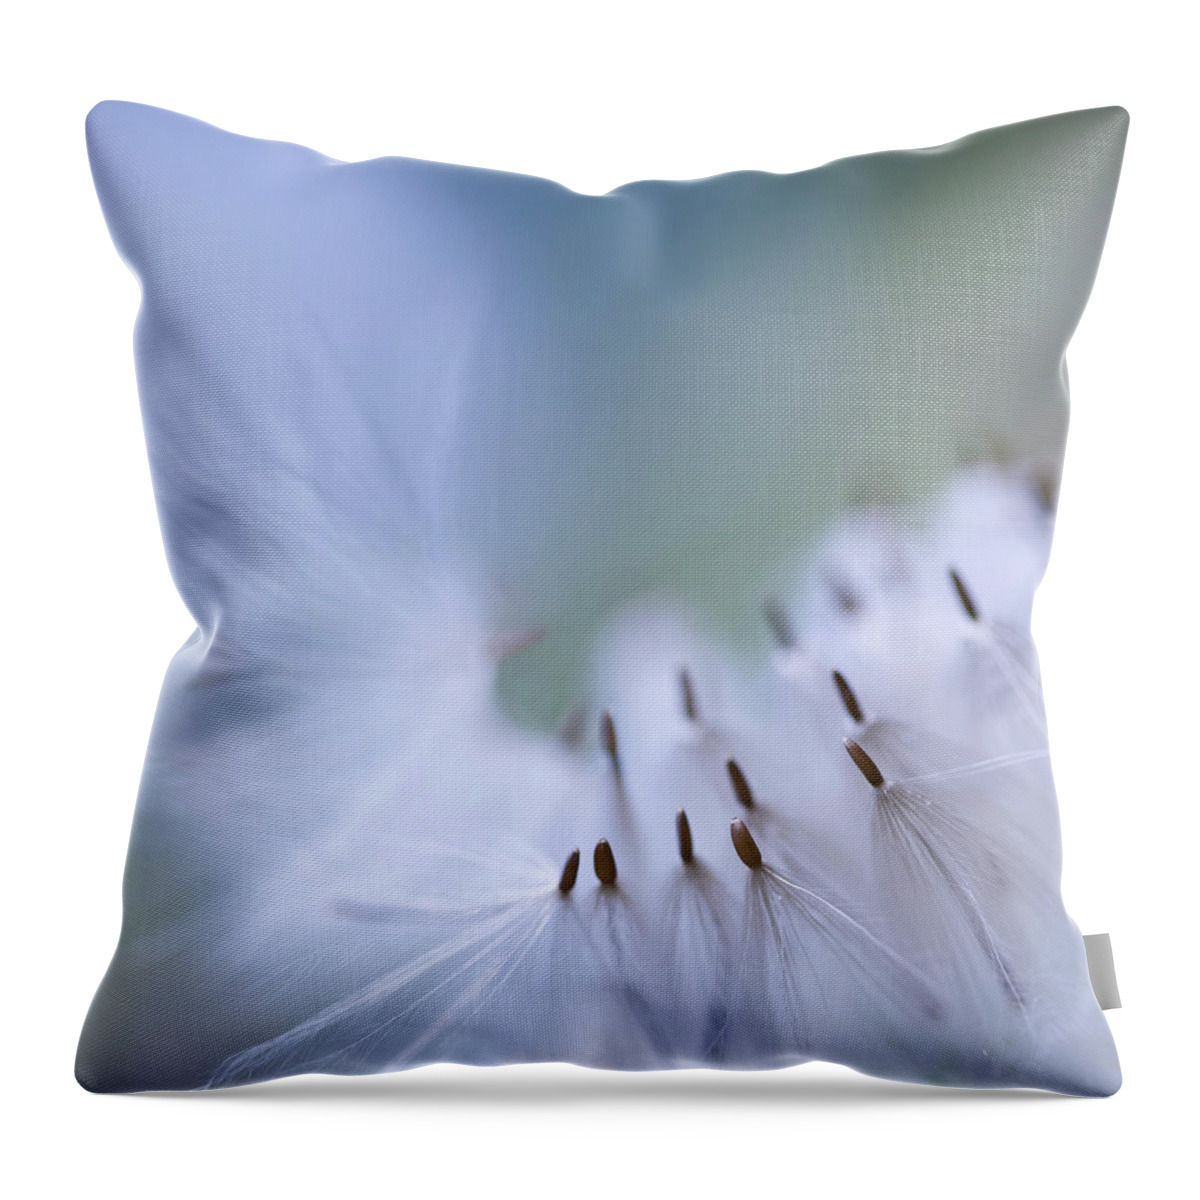 North Rhine Westphalia Throw Pillow featuring the photograph An Angel Passing By by Maria Rafaela Schulze-vorberg